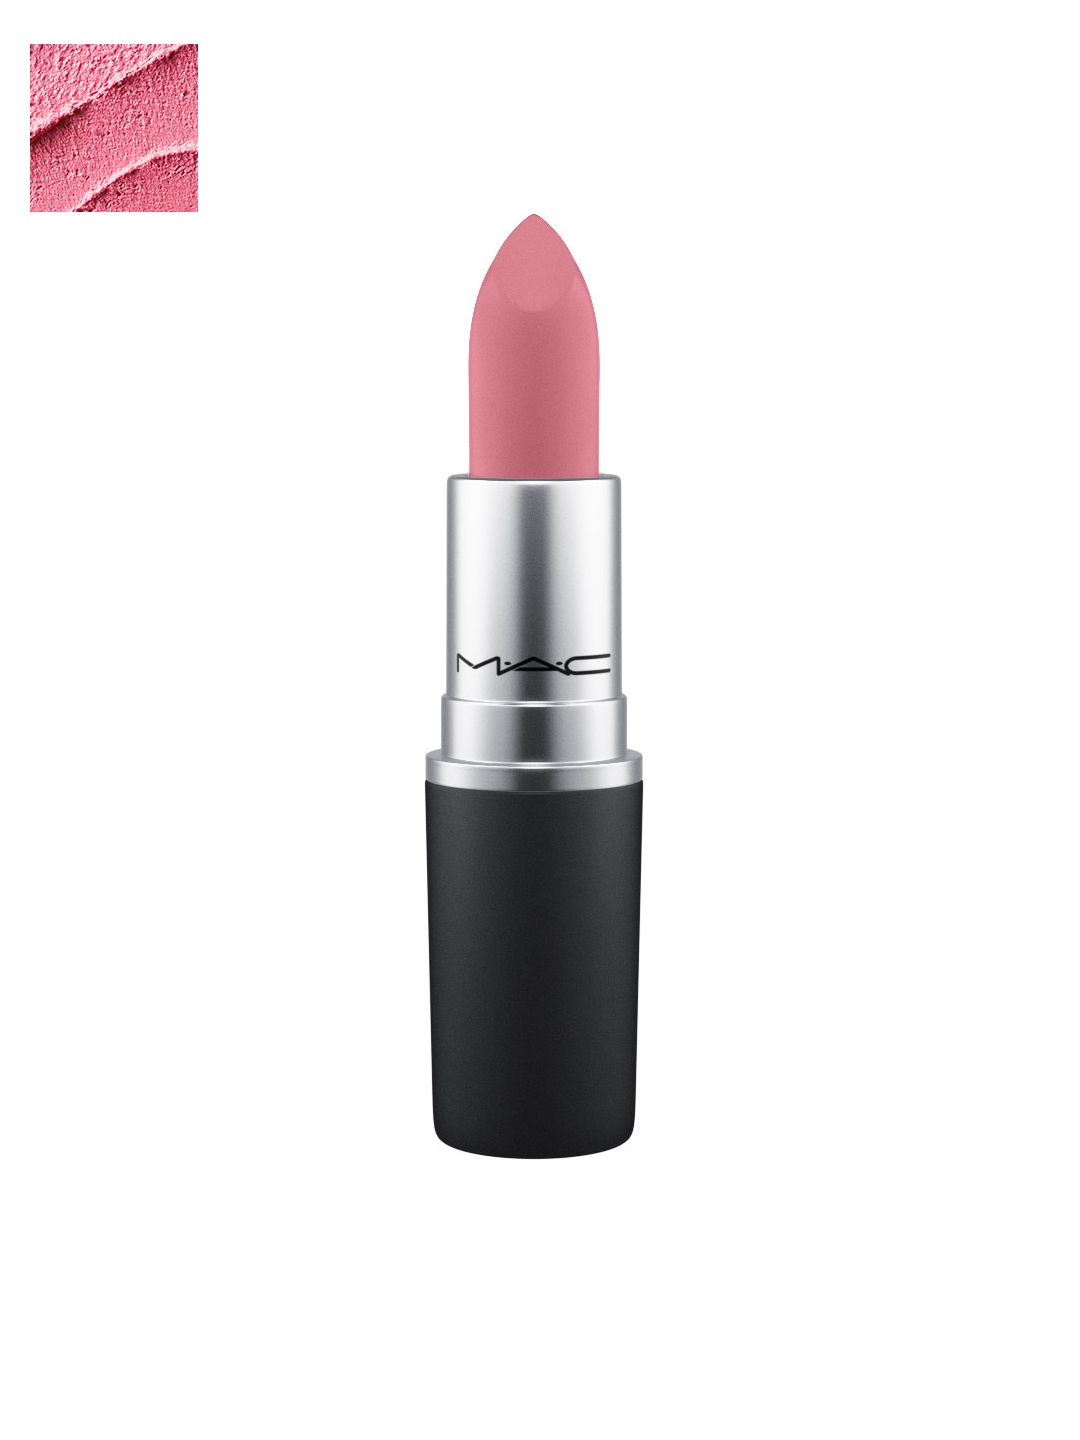 M.A.C Powder Kiss Lipstick - Sultriness 304 Price in India